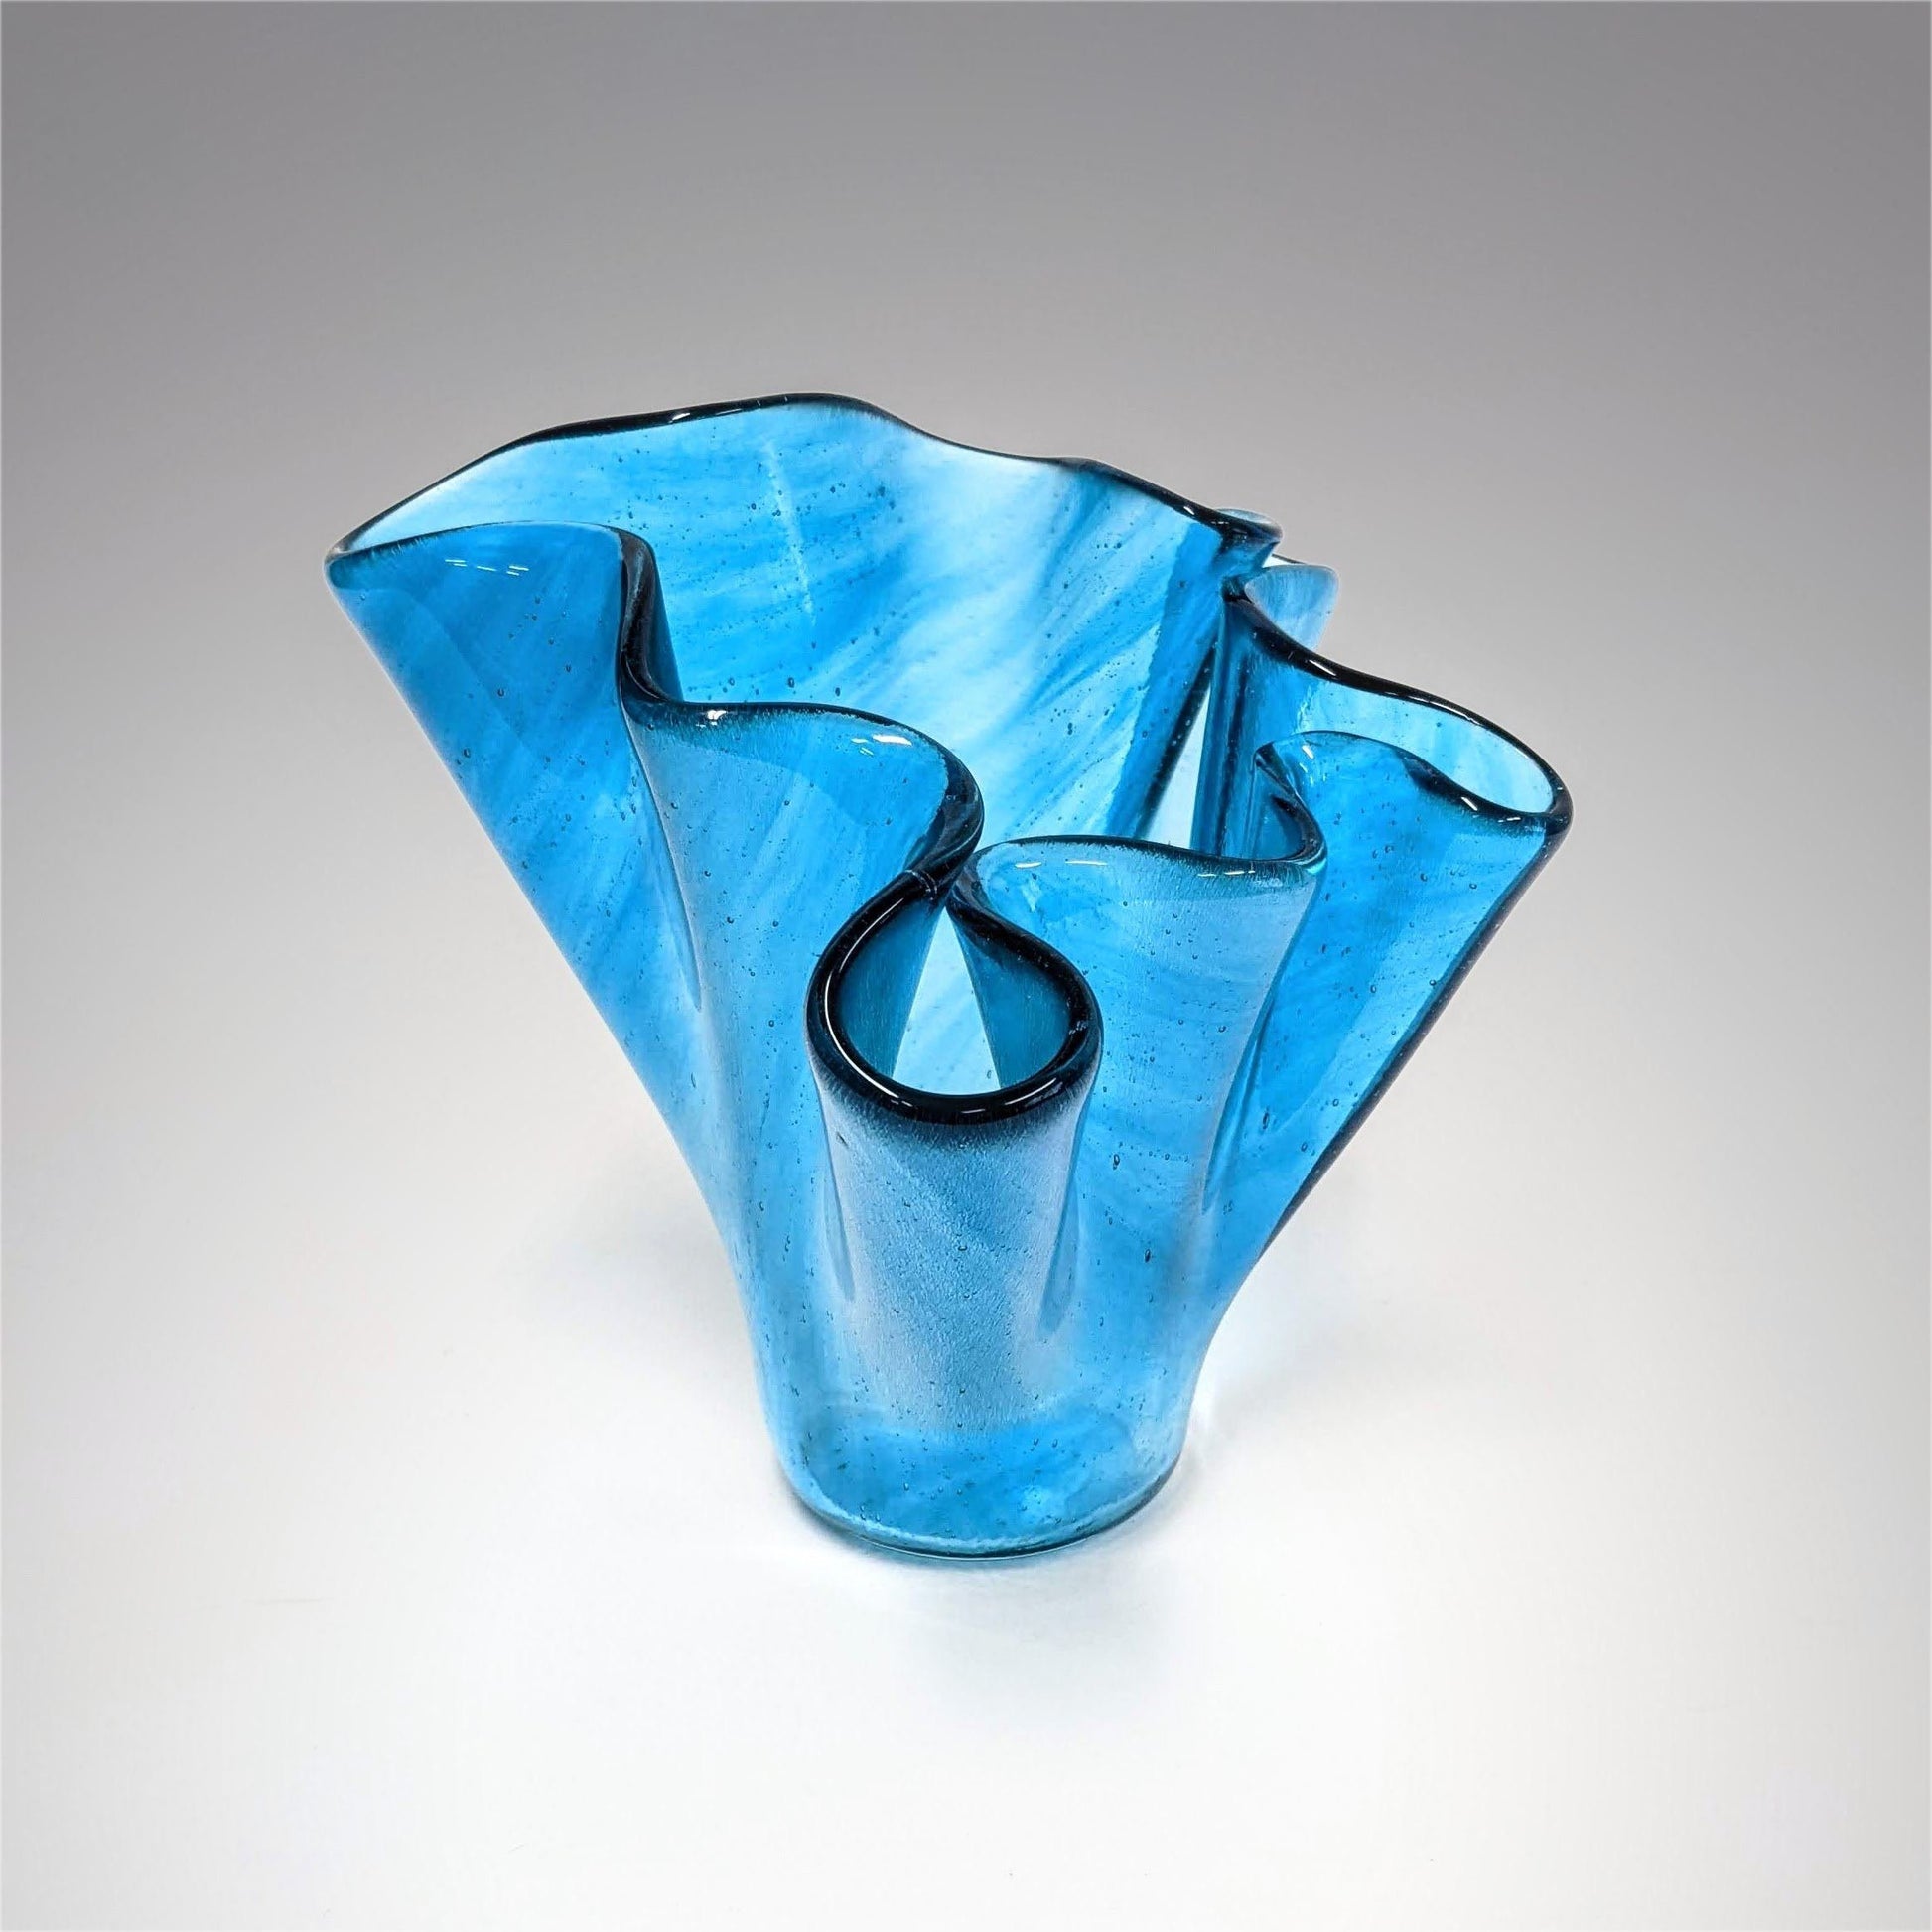 Art Glass Vase in Light Turquoise Blue | Handcrafted Glass Art Gifts